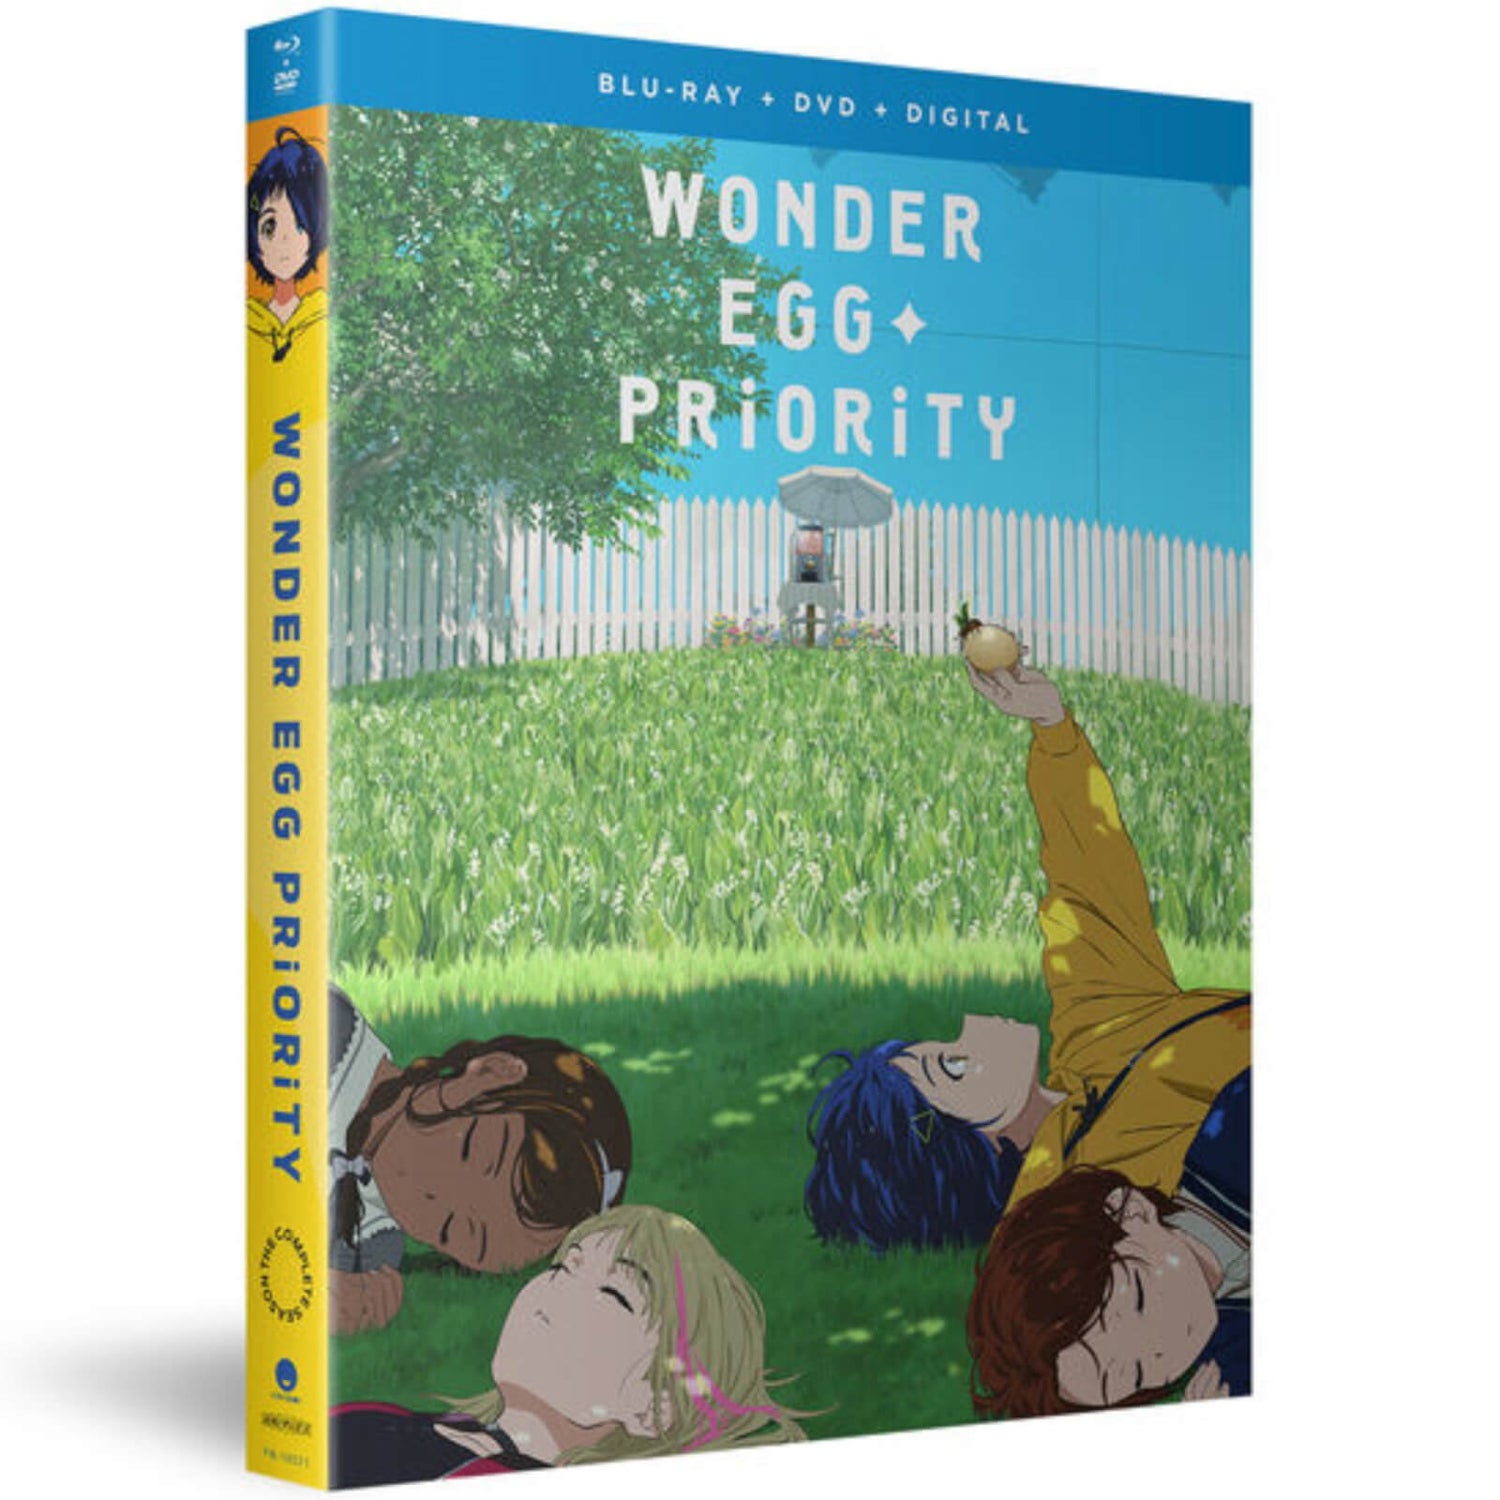 Wonder Egg Priority: The Complete Season (Includes DVD)